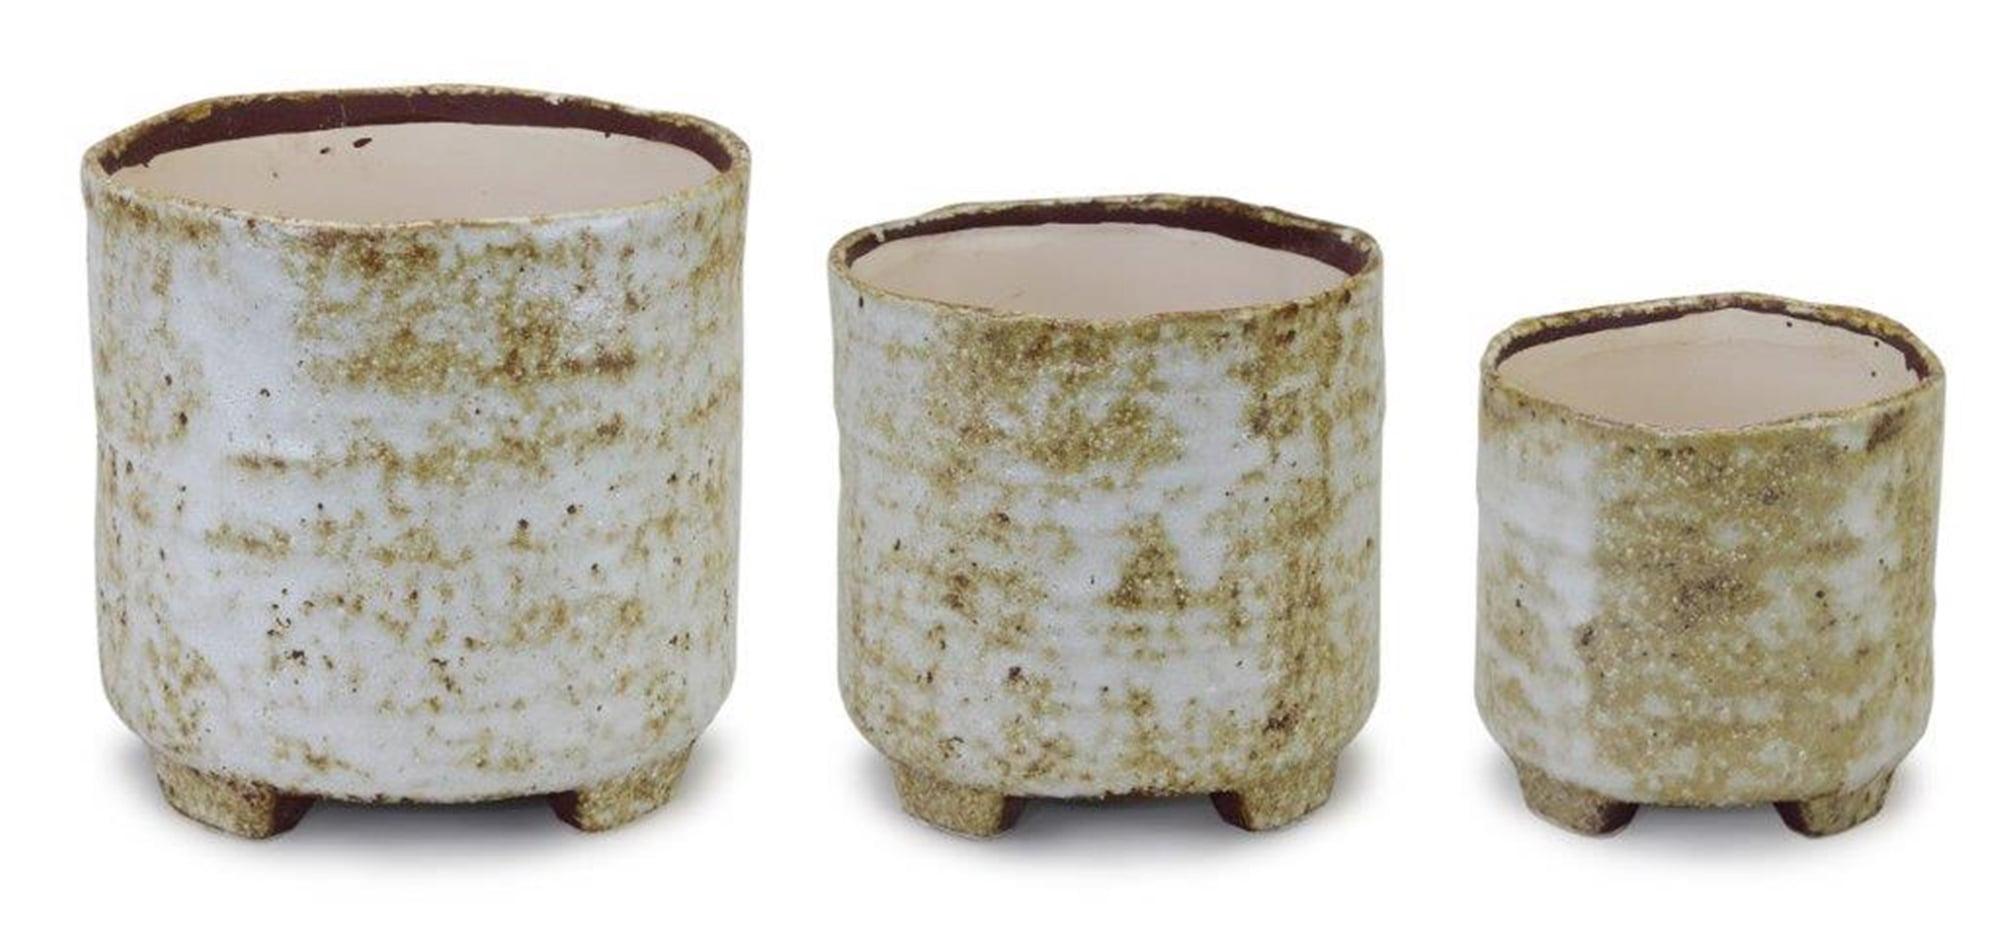 Terra Cotta Trio: Footed Glazed Pots in Warm Brown & Ivory